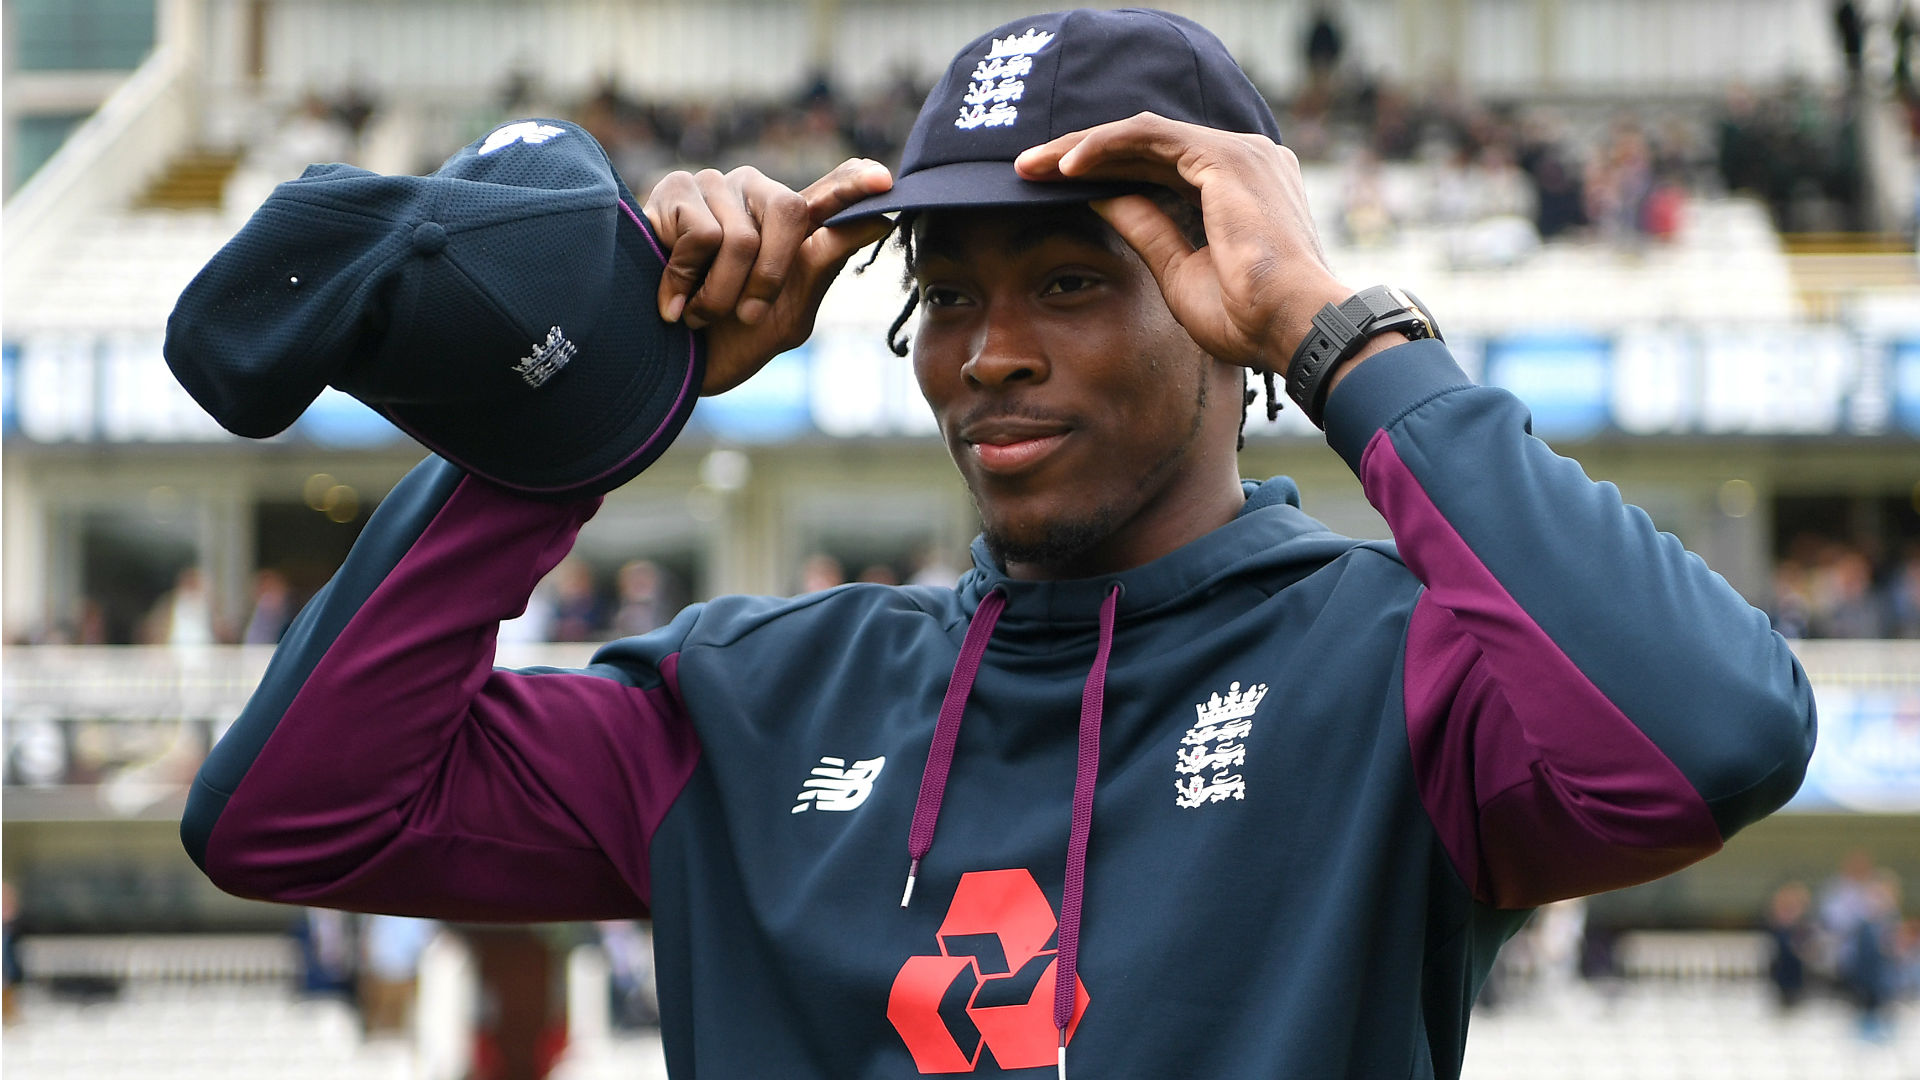 The start of the second Ashes Test was delayed further on Wednesday, when Jofra Archer appeared set to make his debut in the longest format.